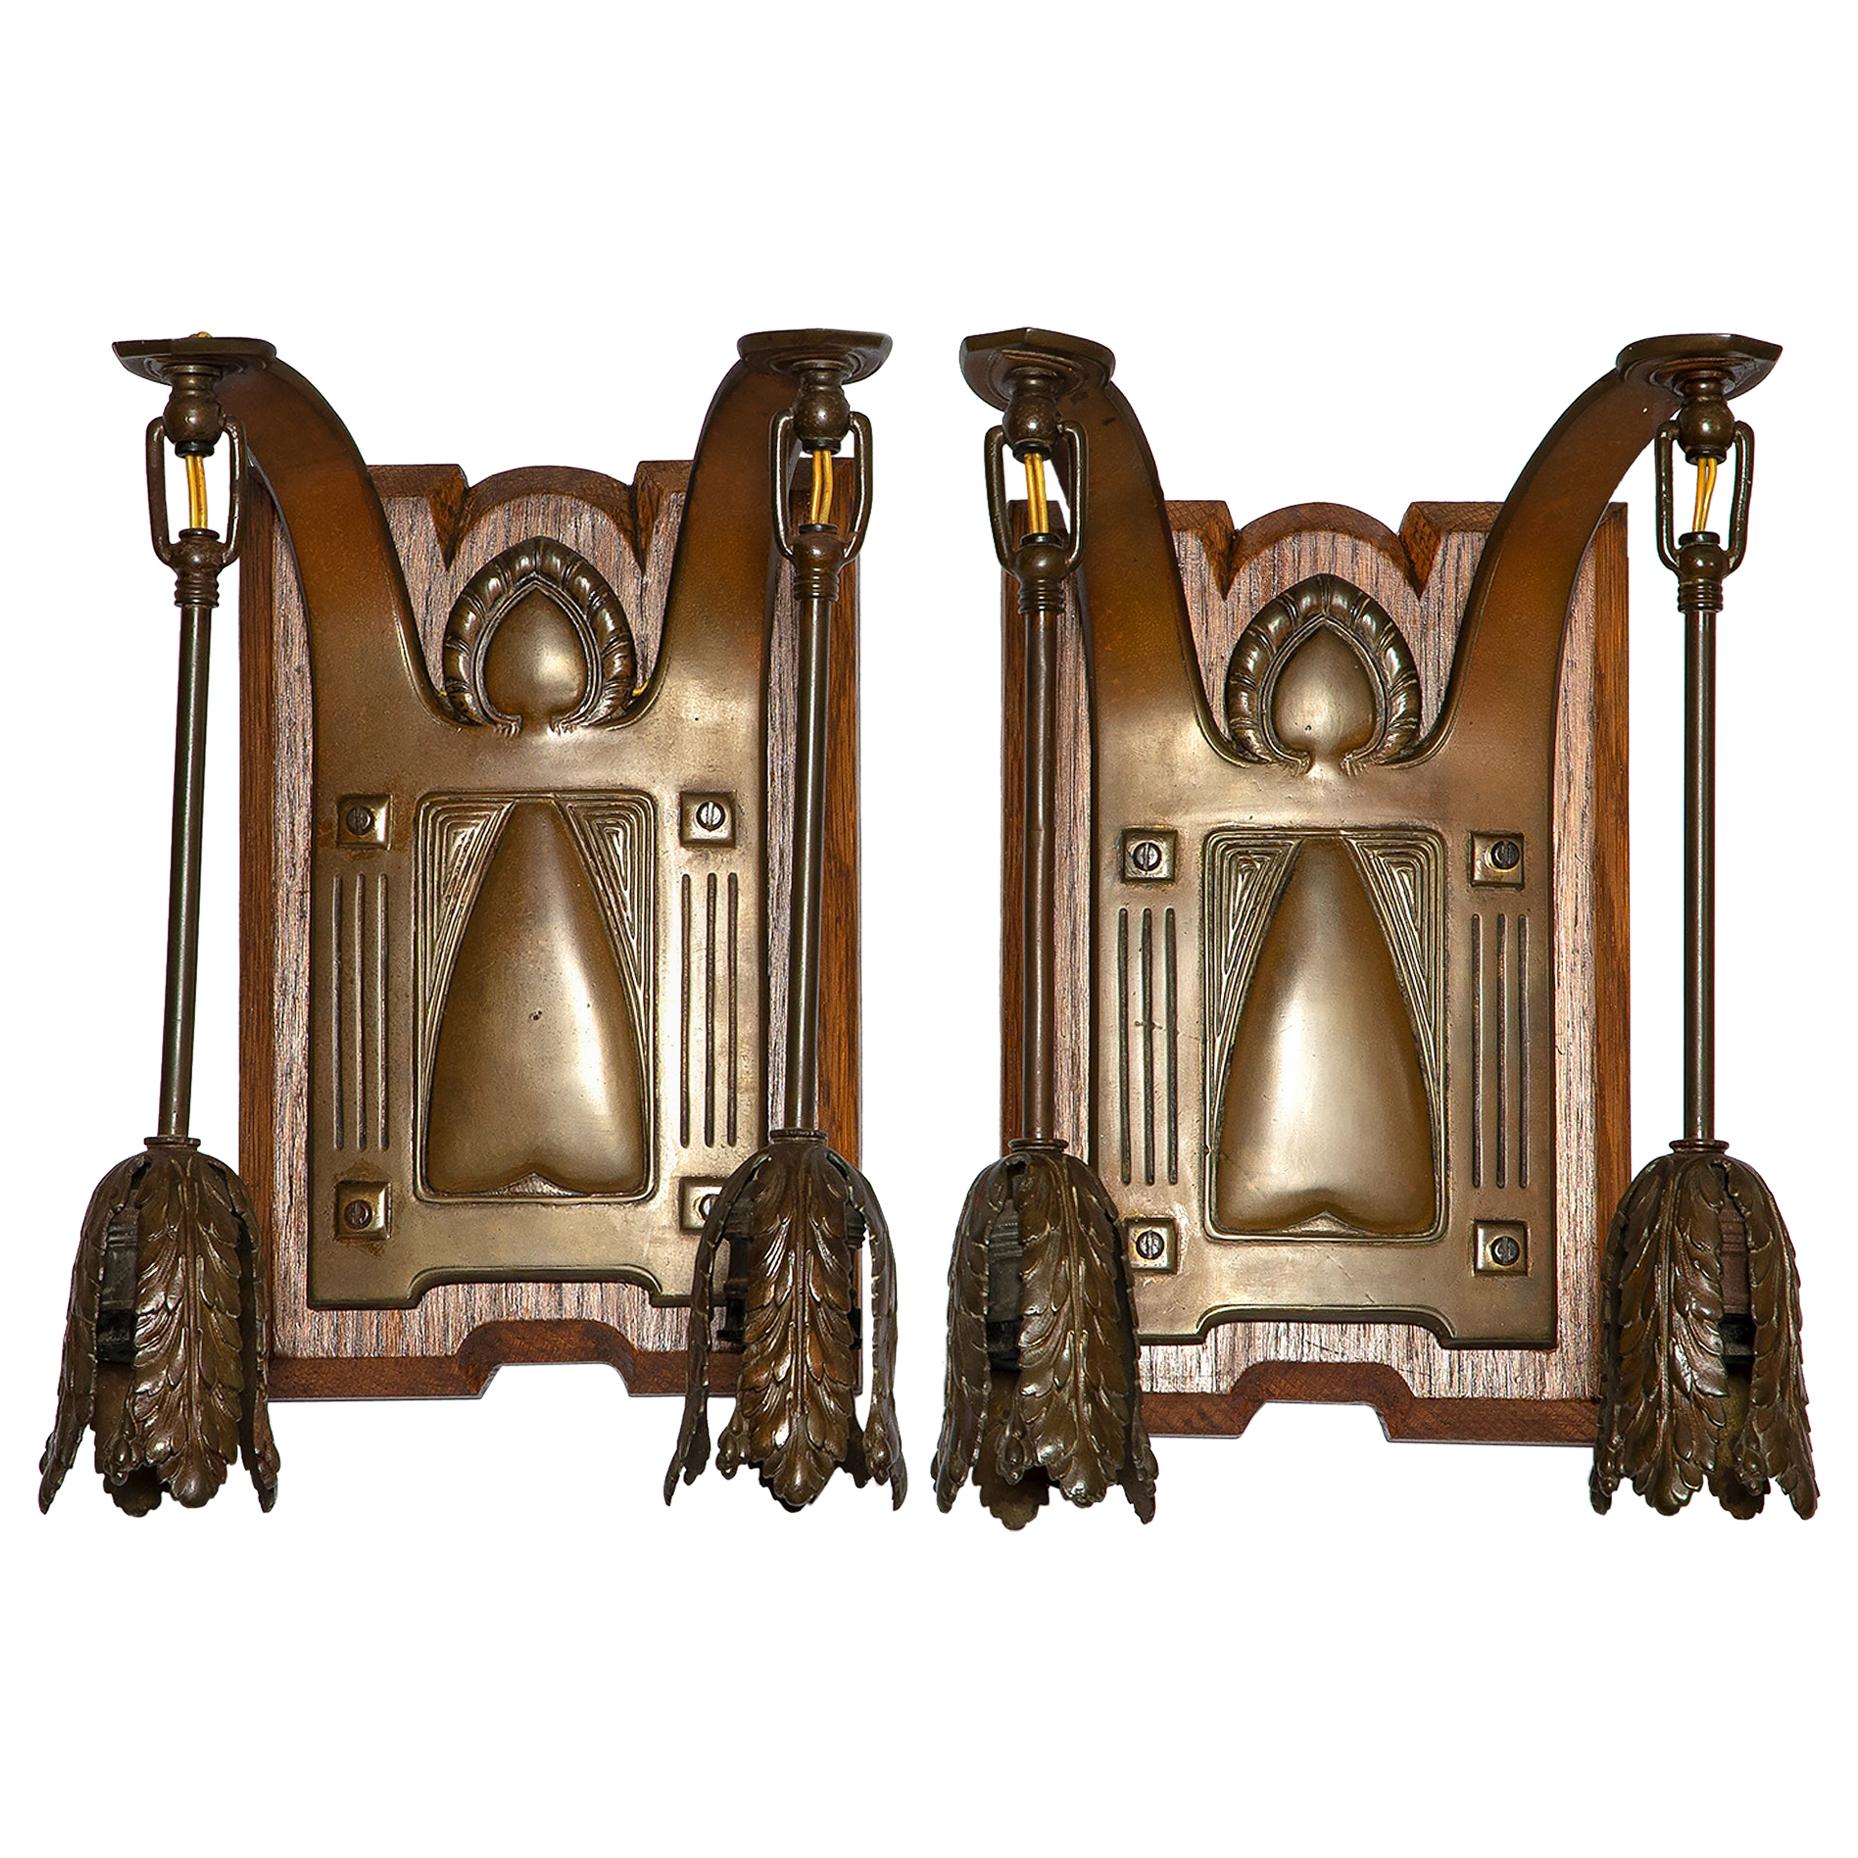 Pair of Oakwood, Bronze and Metal Sconces, England, Late 19th Century